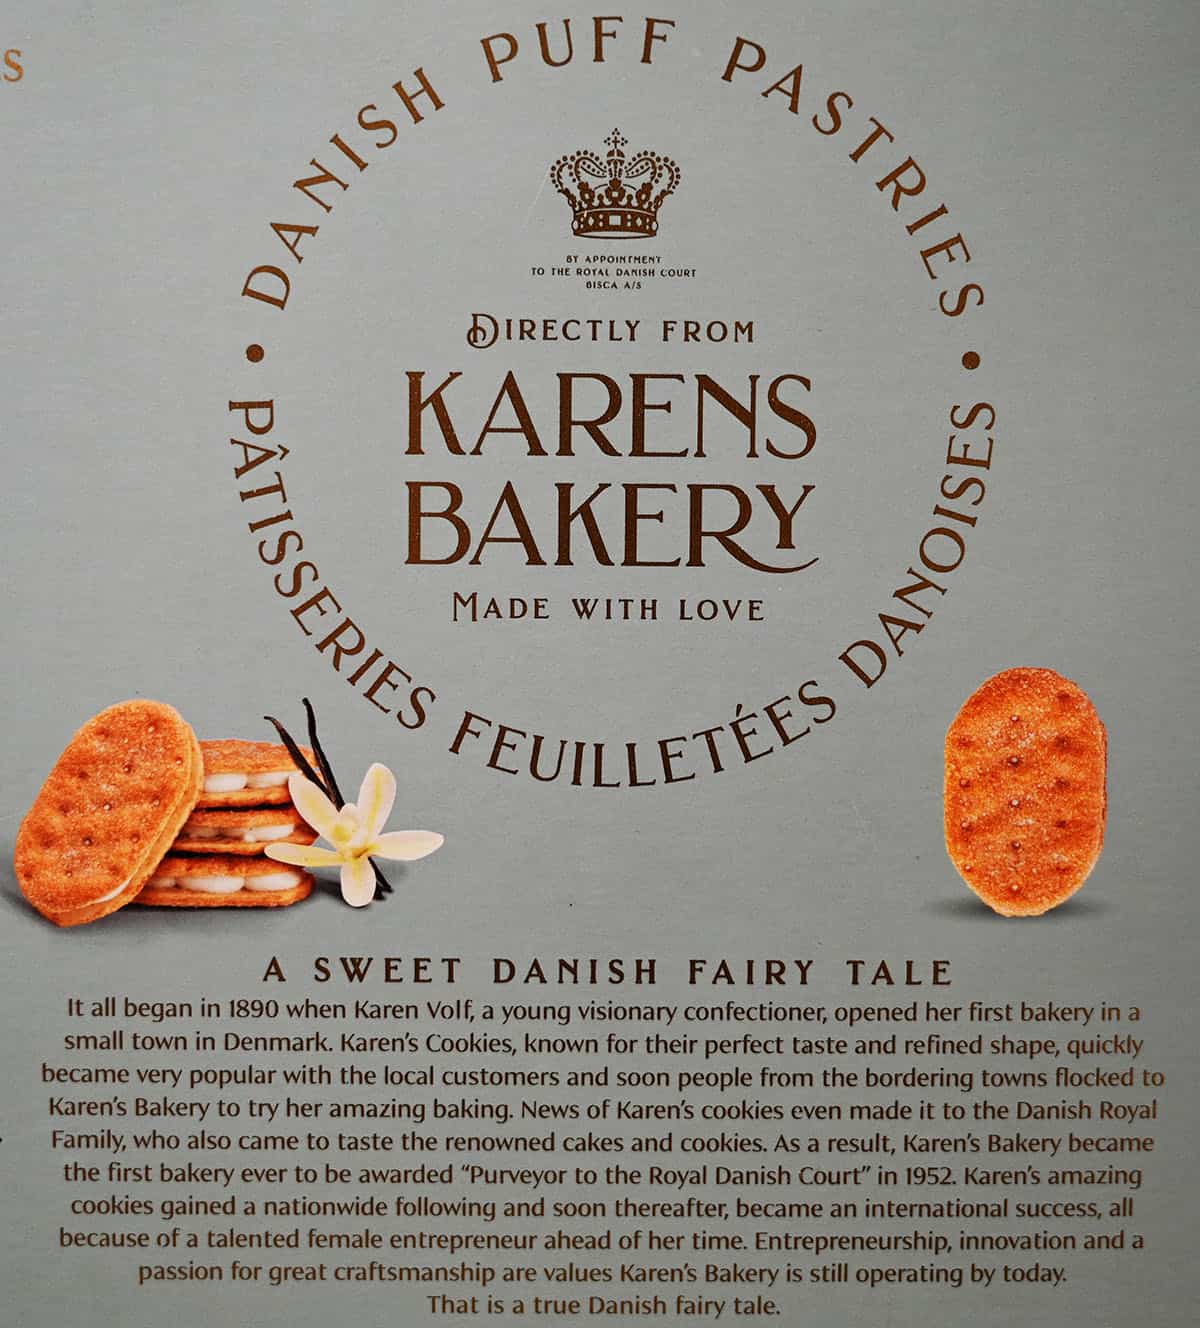 Image of the product description for the Costco Karens Danish Puff Pastries from the back of the box.